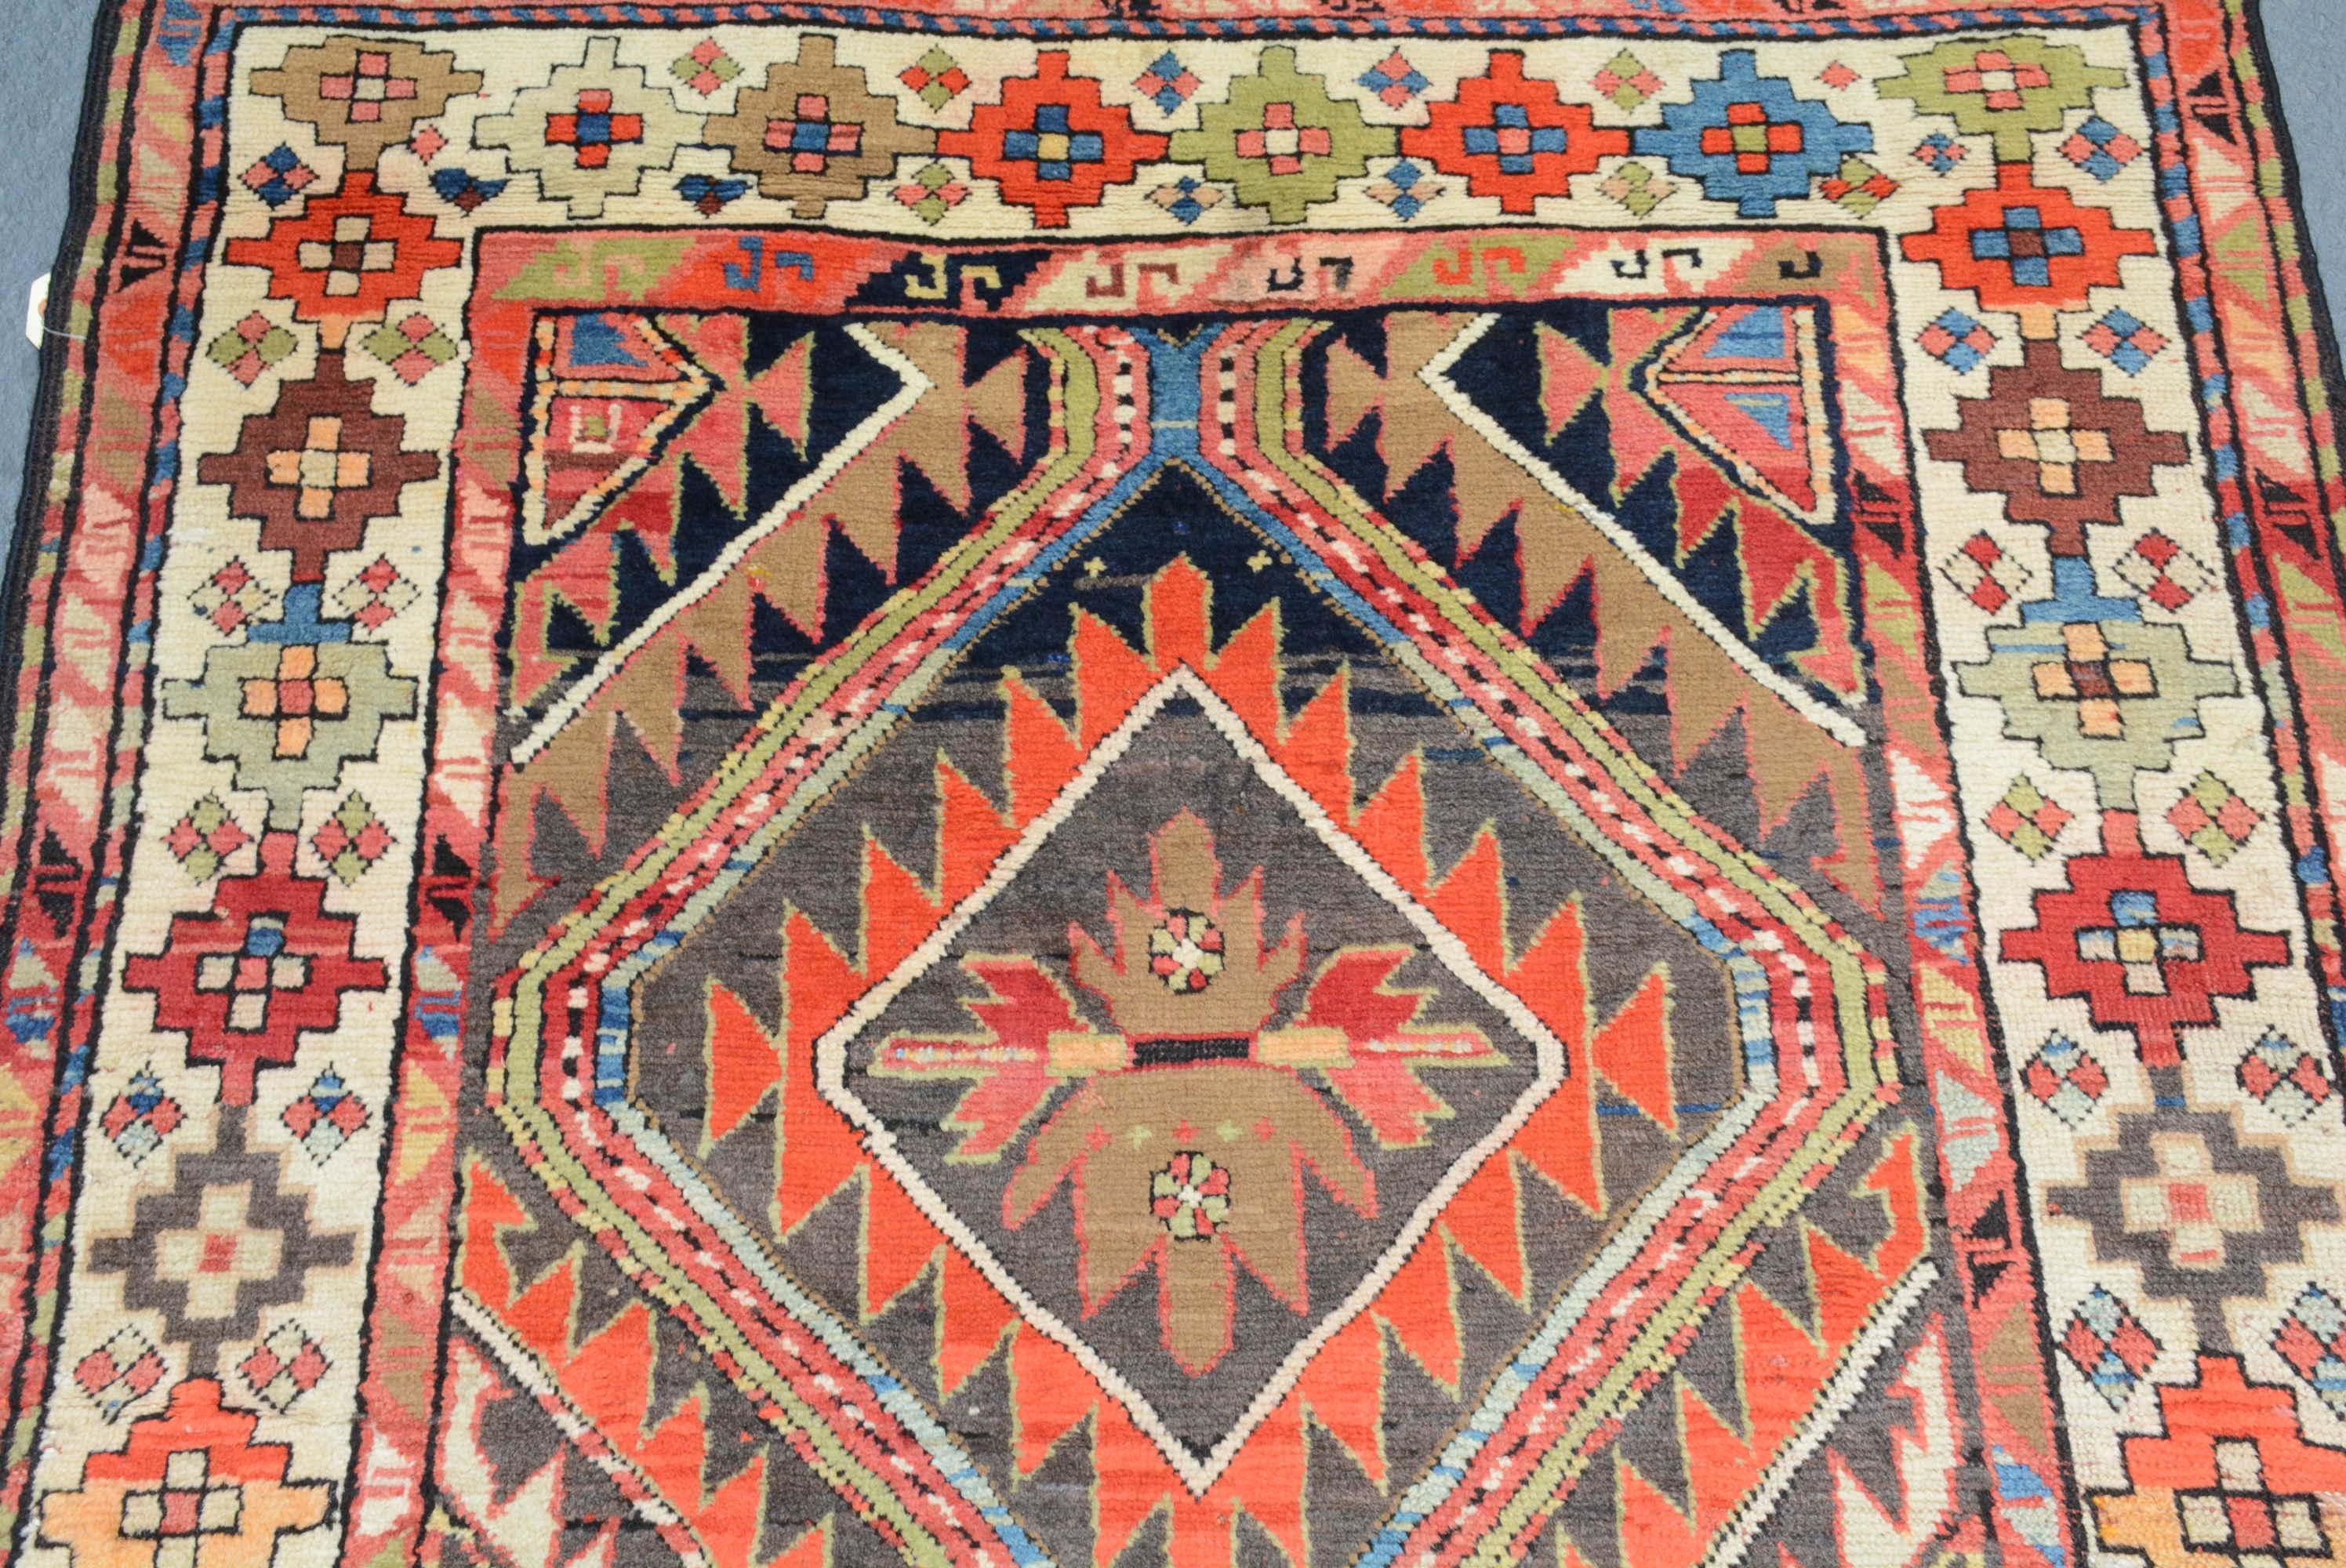 Gendje rugs are woven in the southwest Caucasus, surrounded by the prolific weaving centers of Kazak, Karabagh, and Shirvan. A major railway line that ran from Tiflis to Baku passed through this area, and thus it became a major market or trading